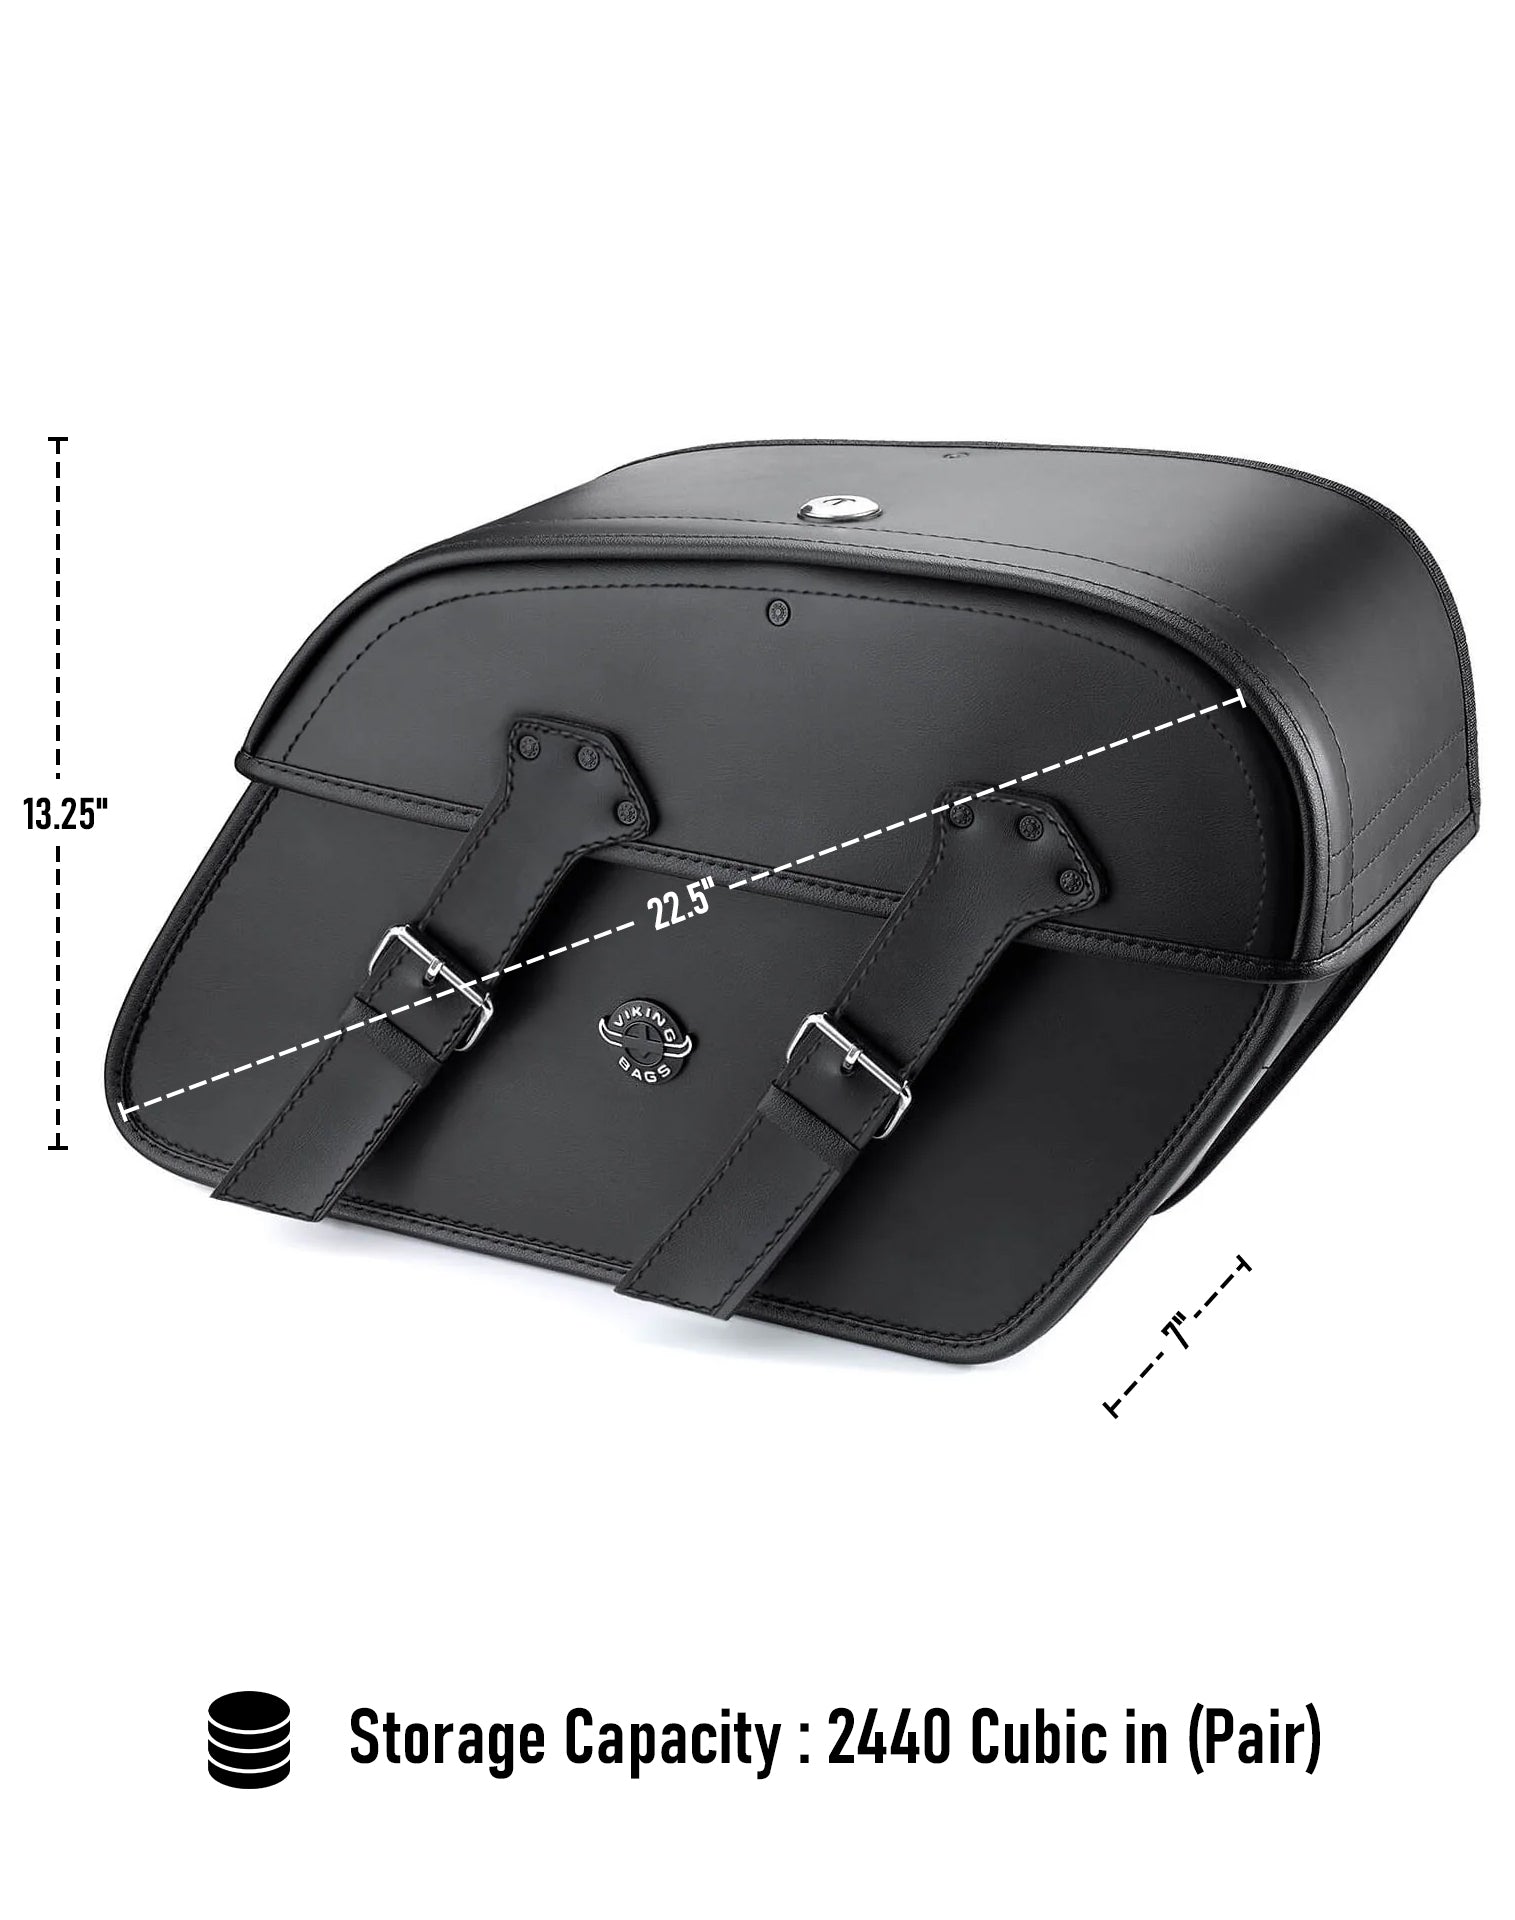 Viking Raven Extra Large Honda Vtx 1800 F Leather Motorcycle Saddlebags Can Store Your Ridings Gears